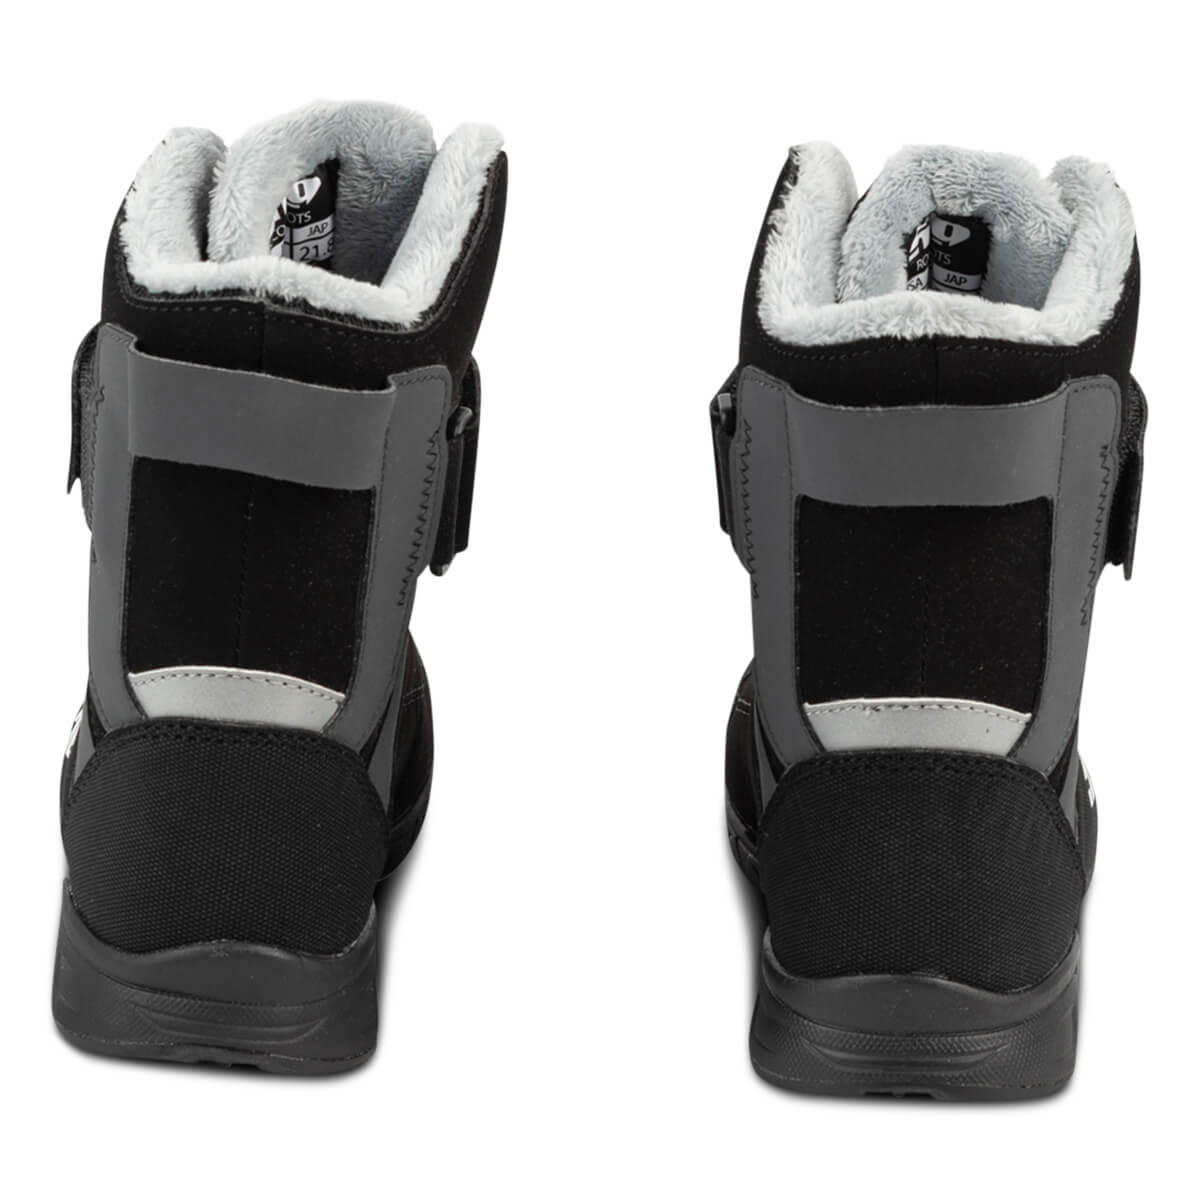 Youth Rocco Snow Boots